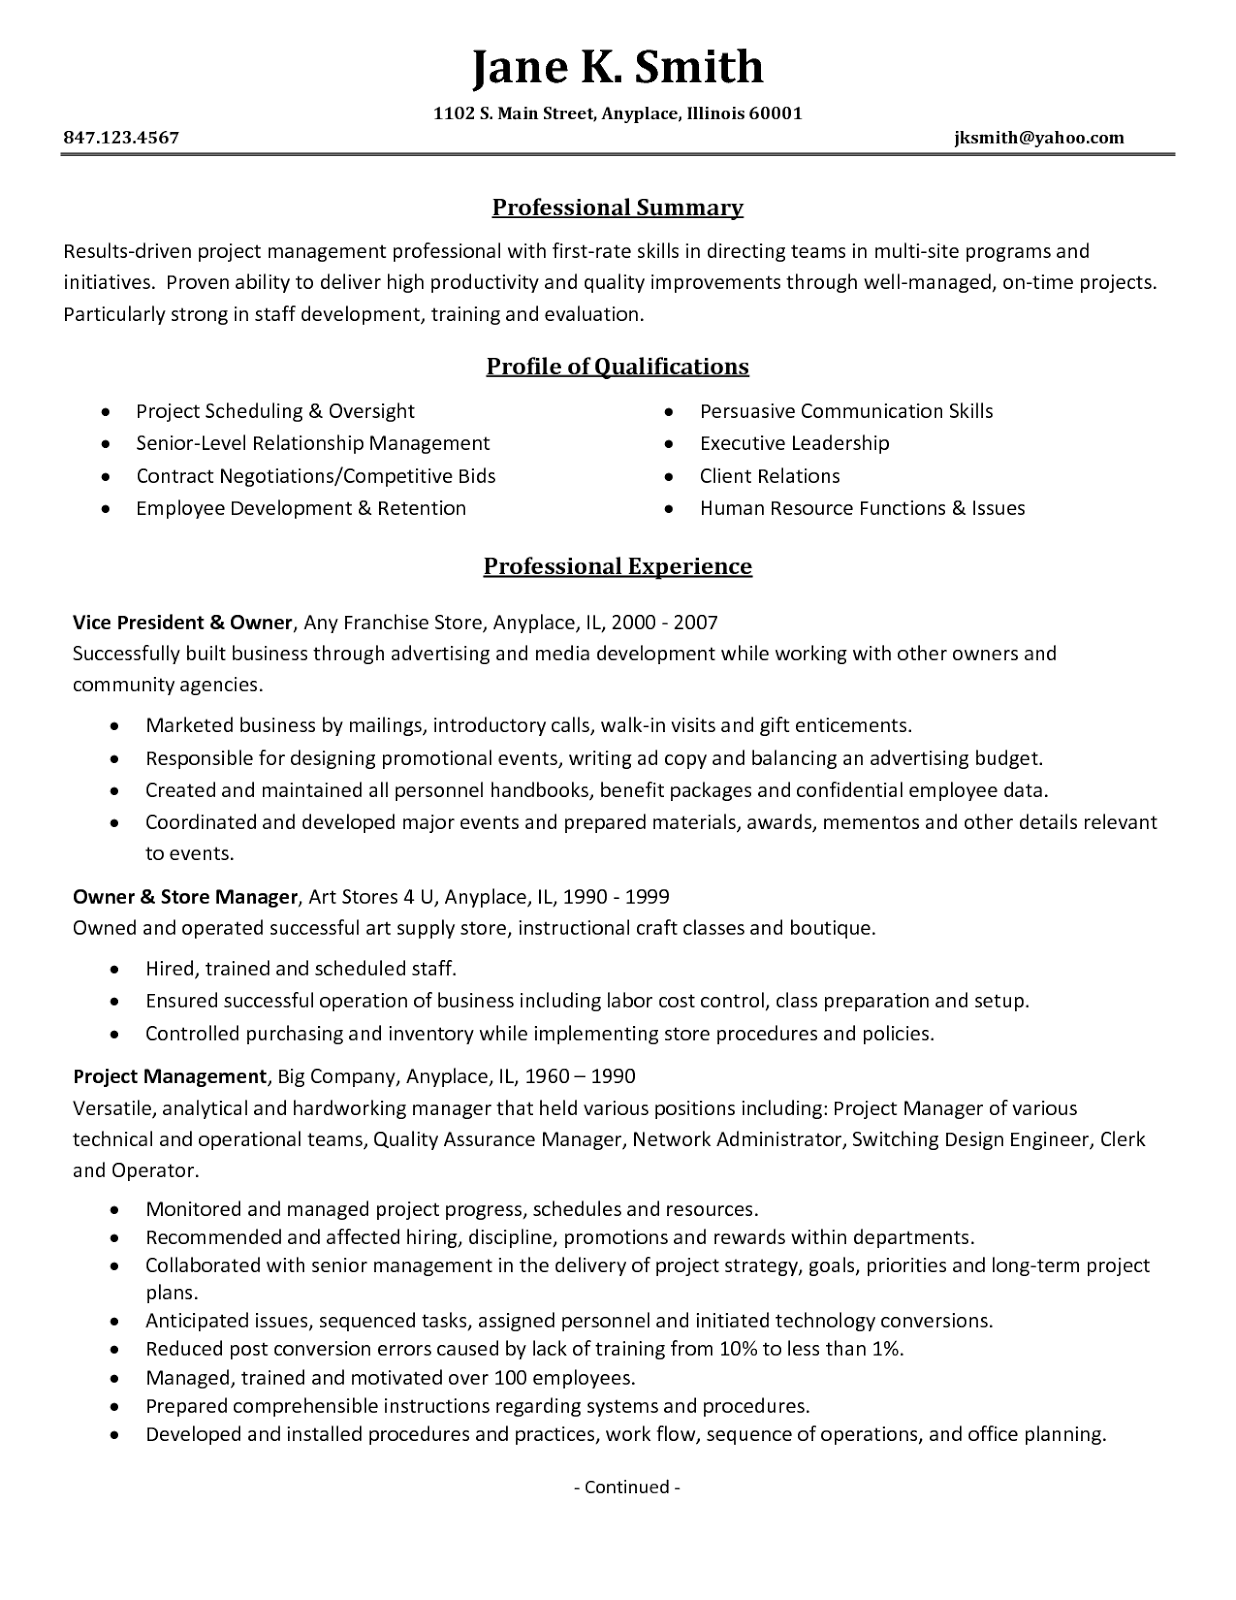 Resume of a political campaign manager